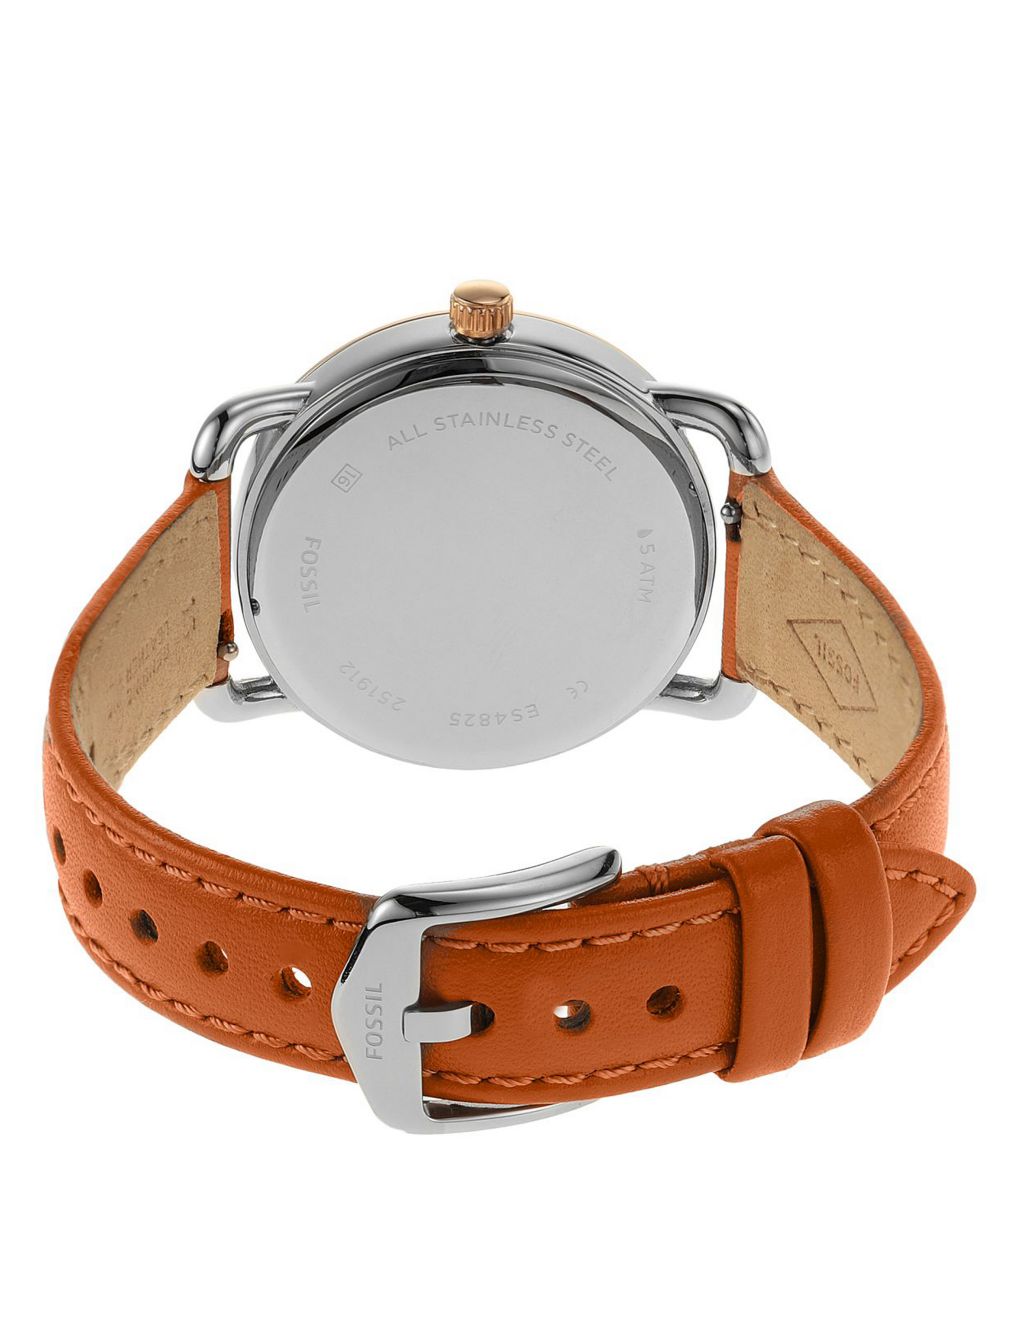 Fossil Copeland Tan Leather Watch image 5